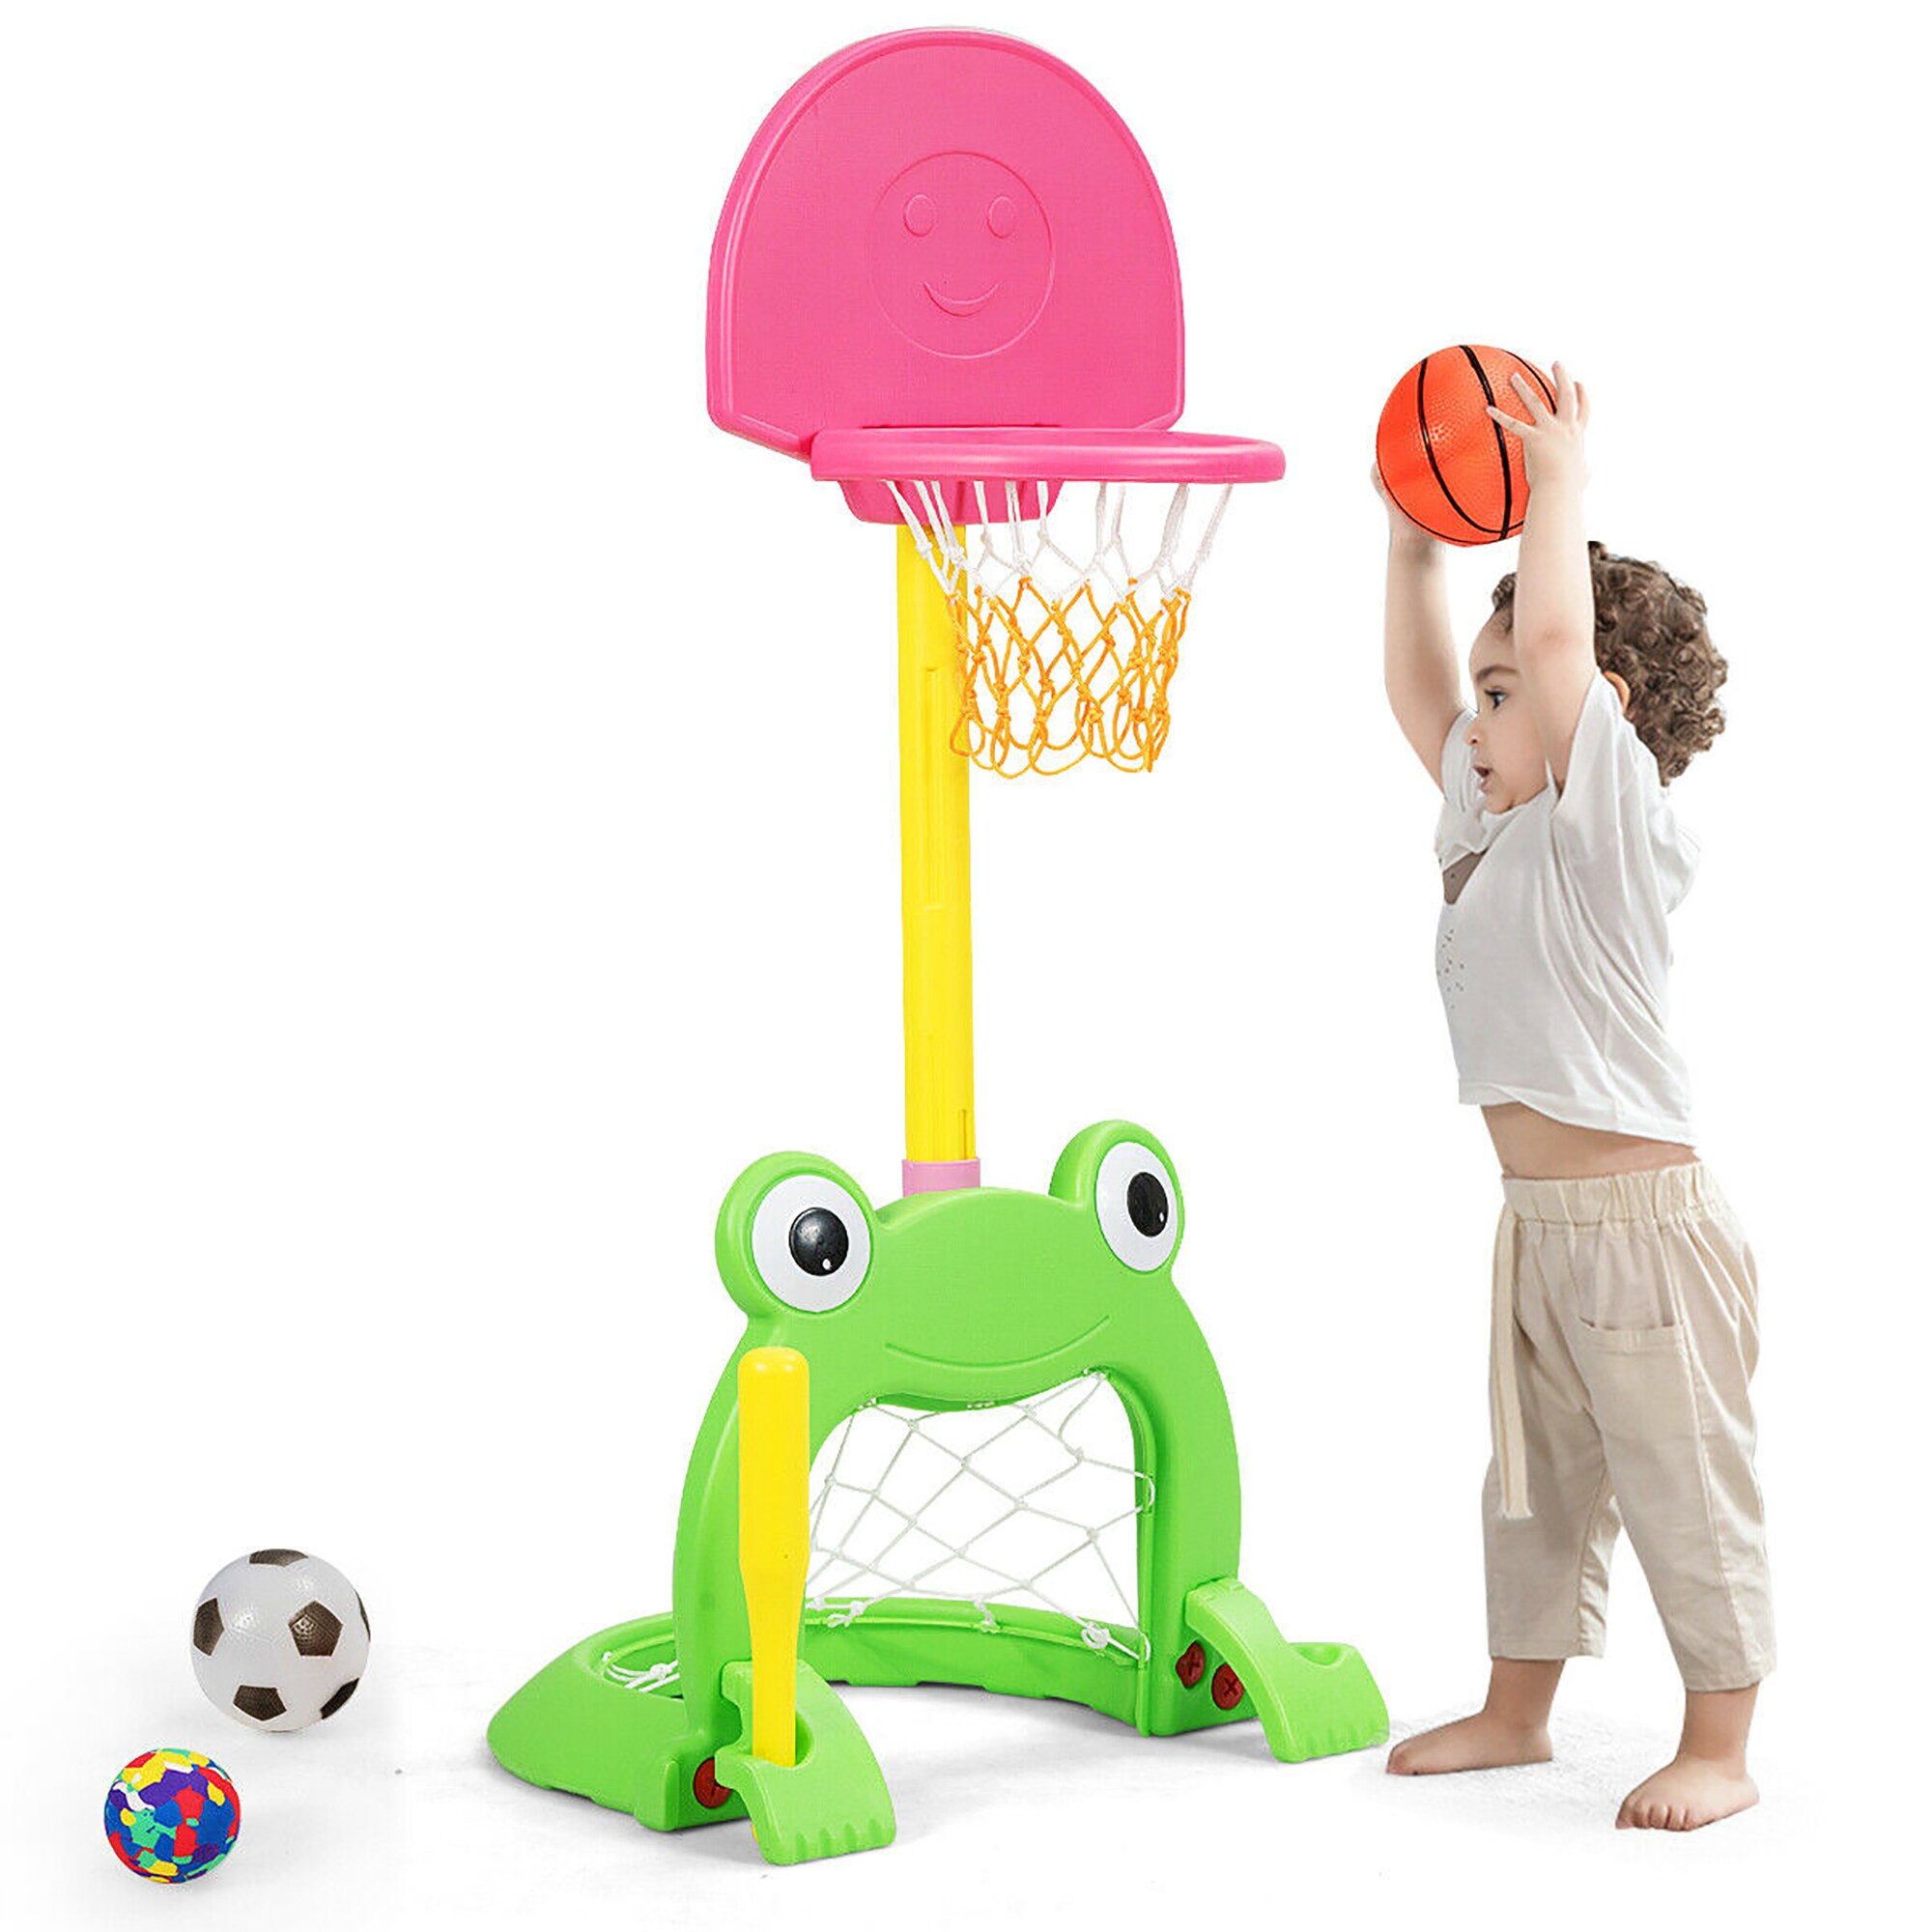 Costzon Basketball Hoop Set Stand Best Gift for Kids Kids 3-in-1 Sports Activity Center Cute Tiger Adjustable Height 4.7Ft-5.2Ft Basketball Stand with Darts and Ring Toss Play Set 